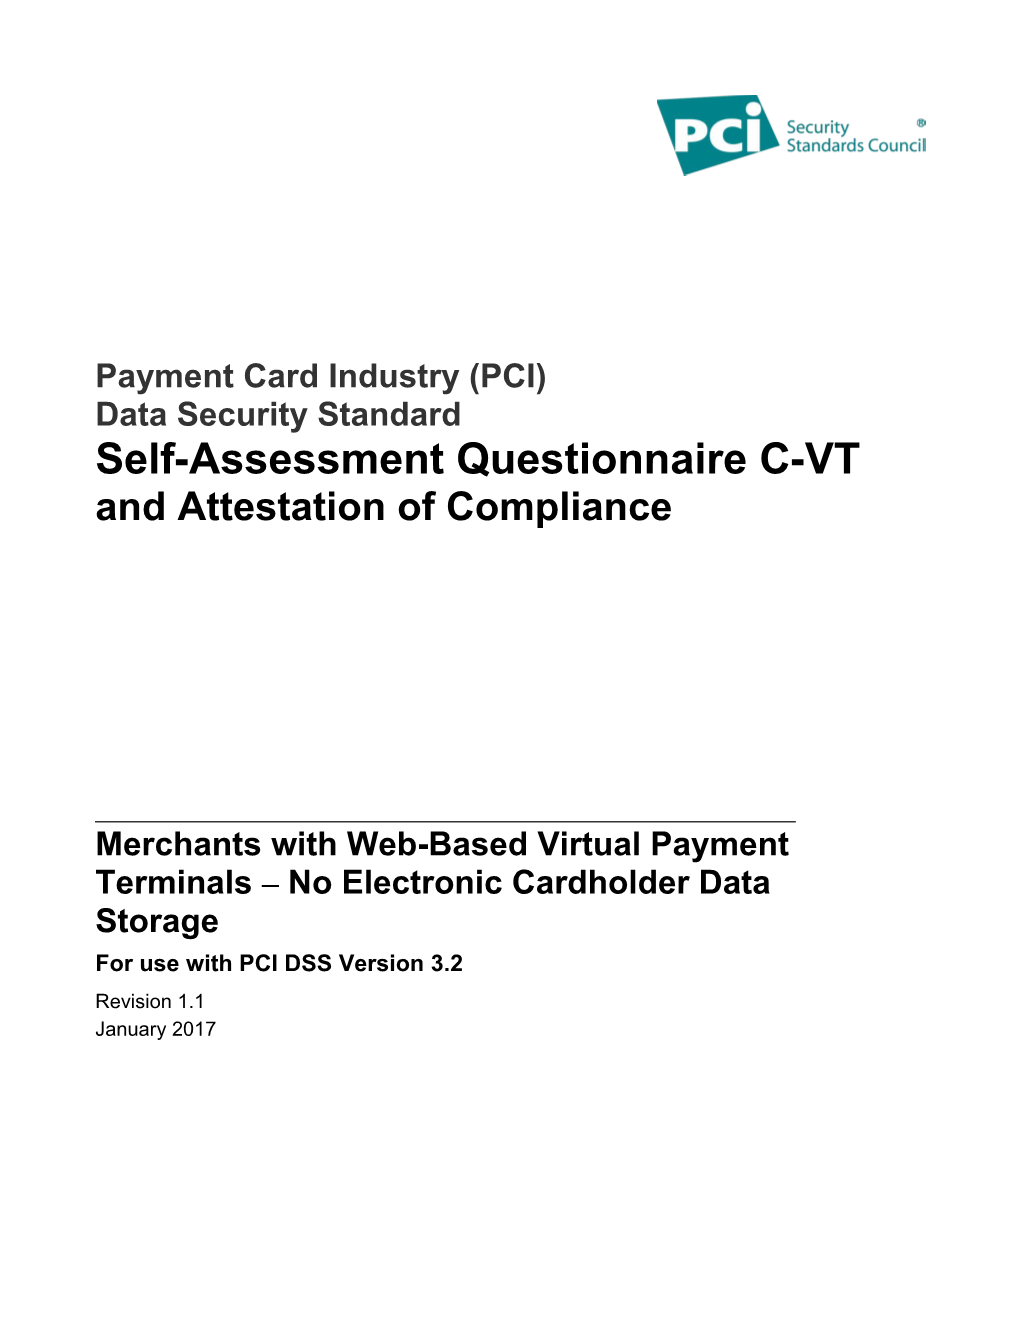 Merchants with Web-Based Virtual Payment Terminals No Electronic Cardholder Data Storage